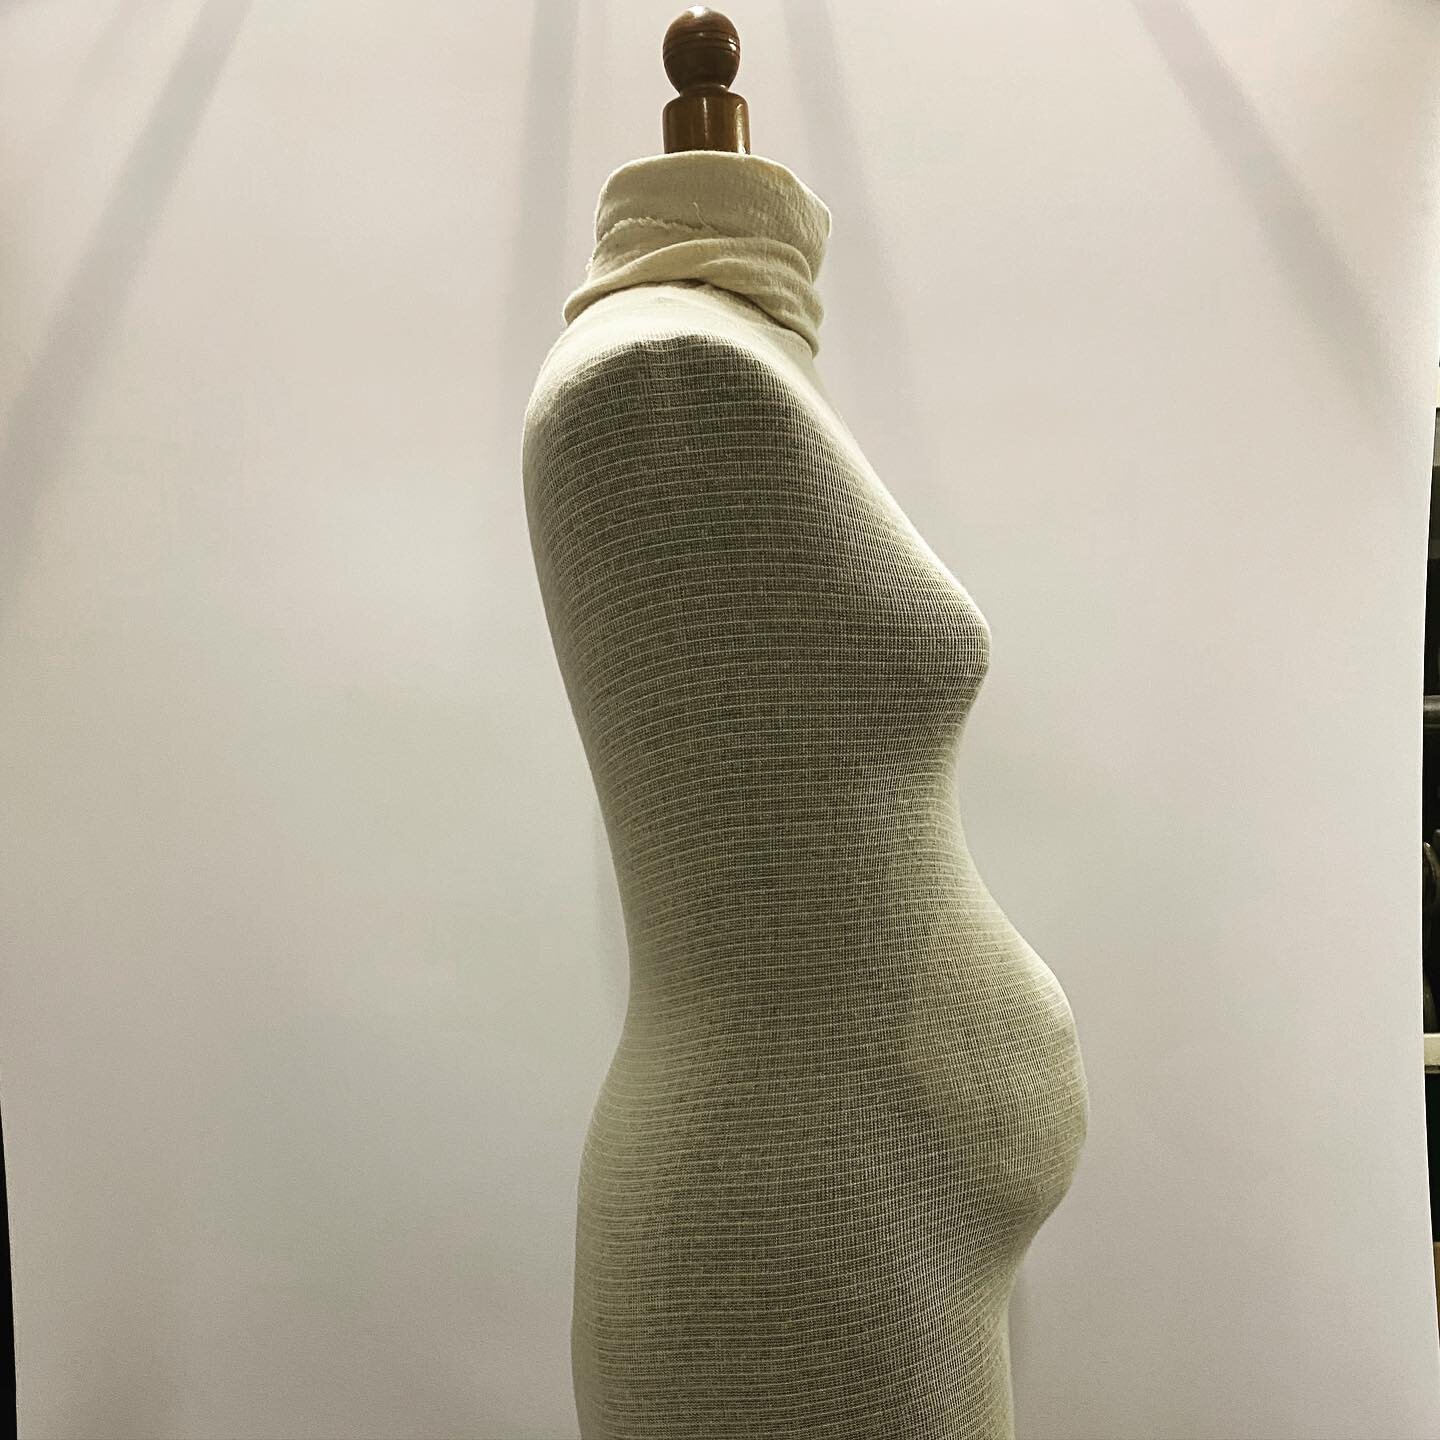 Hello mannequin padding my old friend ... 

Going through outtakes and major shapes from yesterday&rsquo;s photo session with the excellent @sarahbendall_fashionhistory and her lovely reproduction of the Verney bodies with maternity stomacher (c1665-